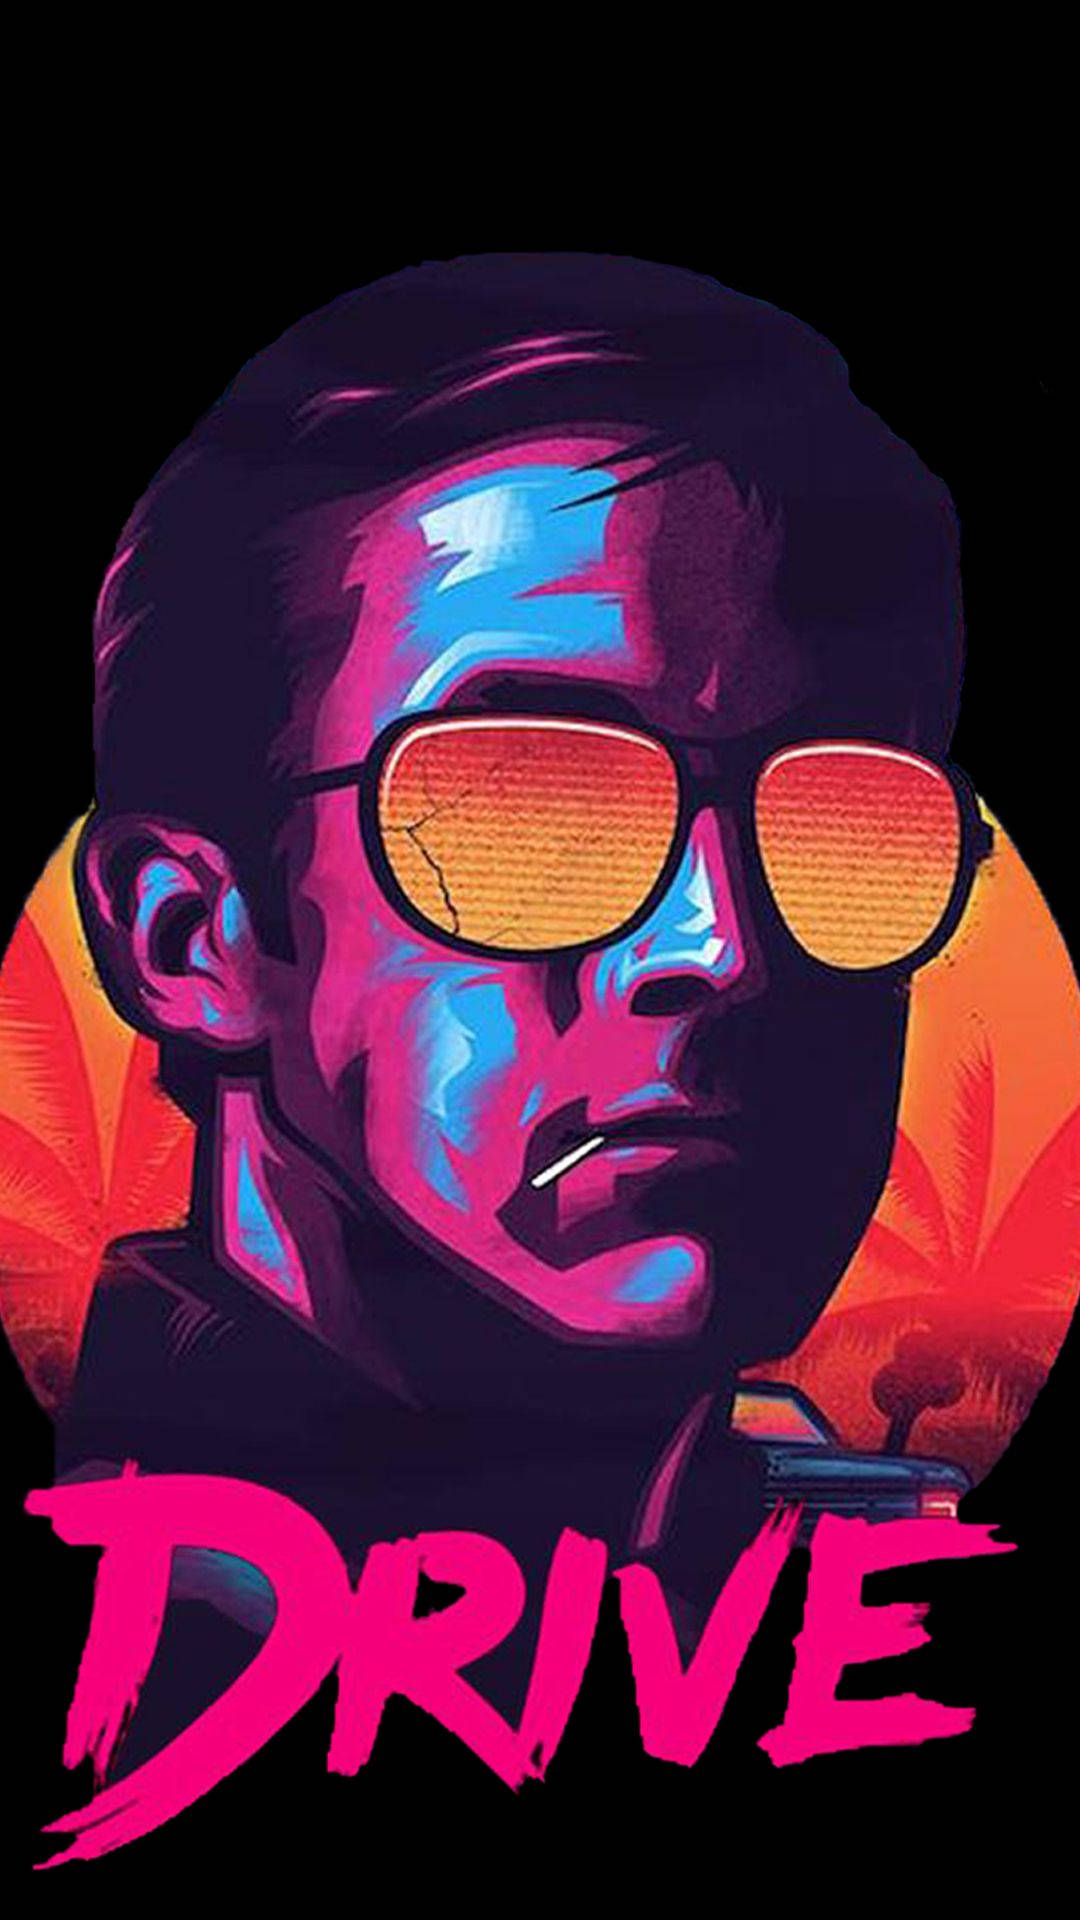 Drive Movie 80s Themed Cover Wallpaper